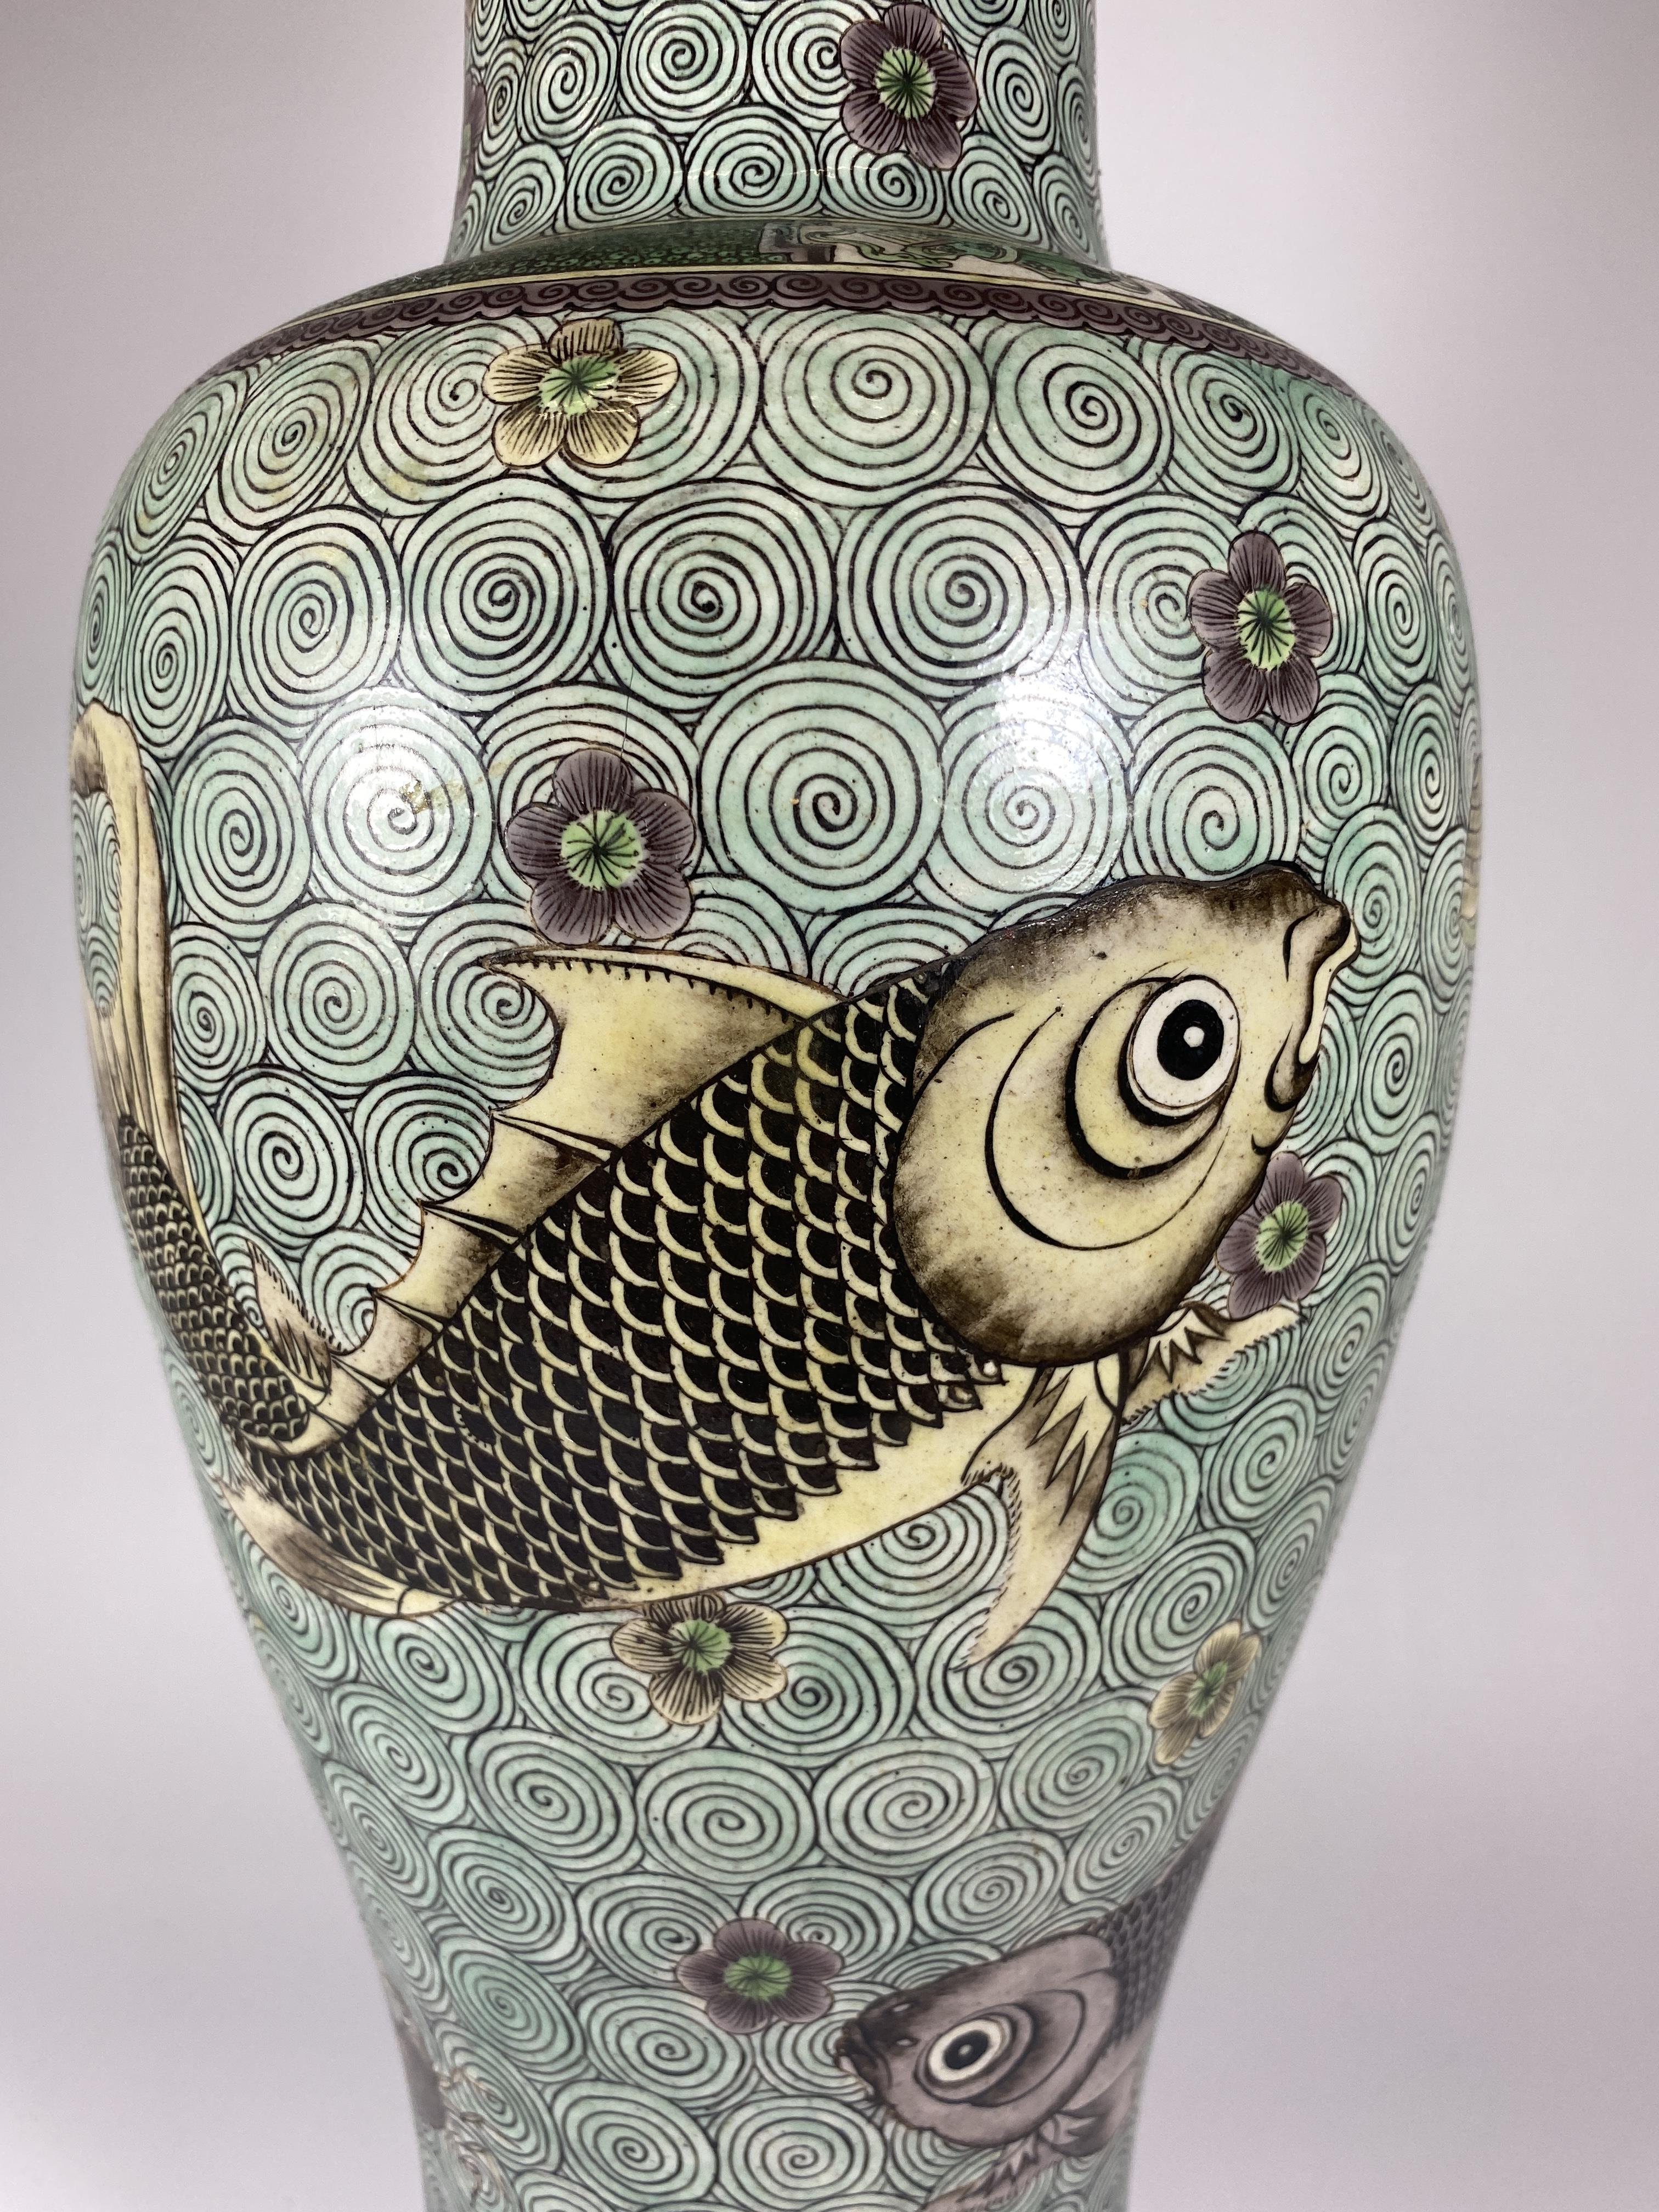 A LARGE MID 19TH CENTURY CHINESE BALUSTER FORM VASE WITH ENAMEL FISH ON A GEOMETRIC CIRCLES - Image 2 of 9